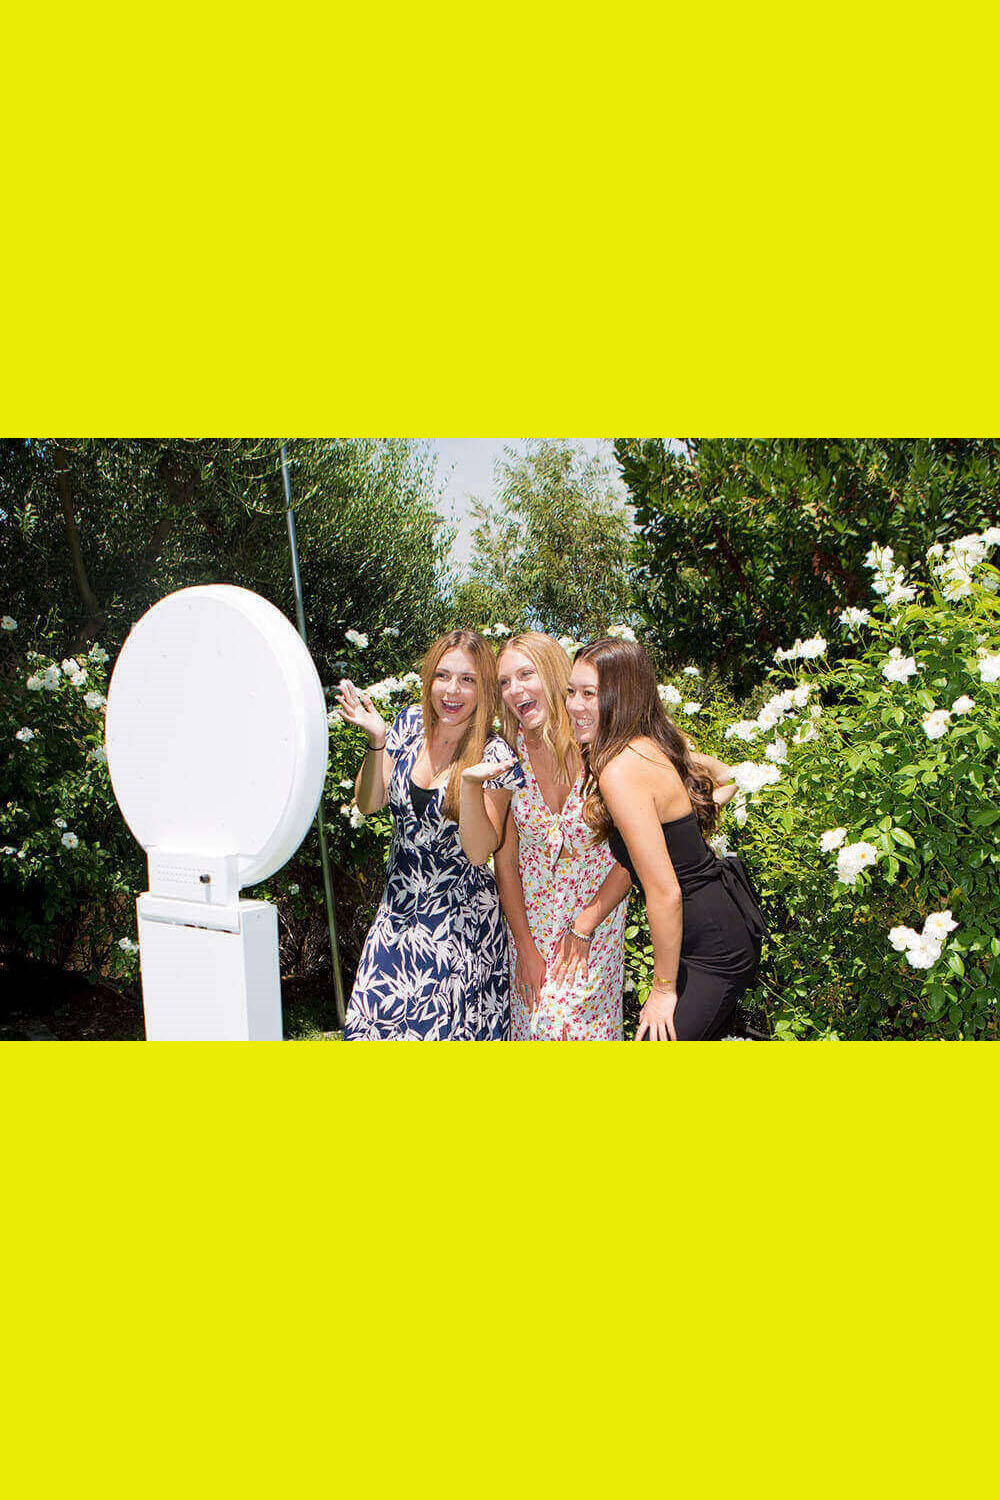 Three girls know how to have fun with this Antelope Valley selfie station.